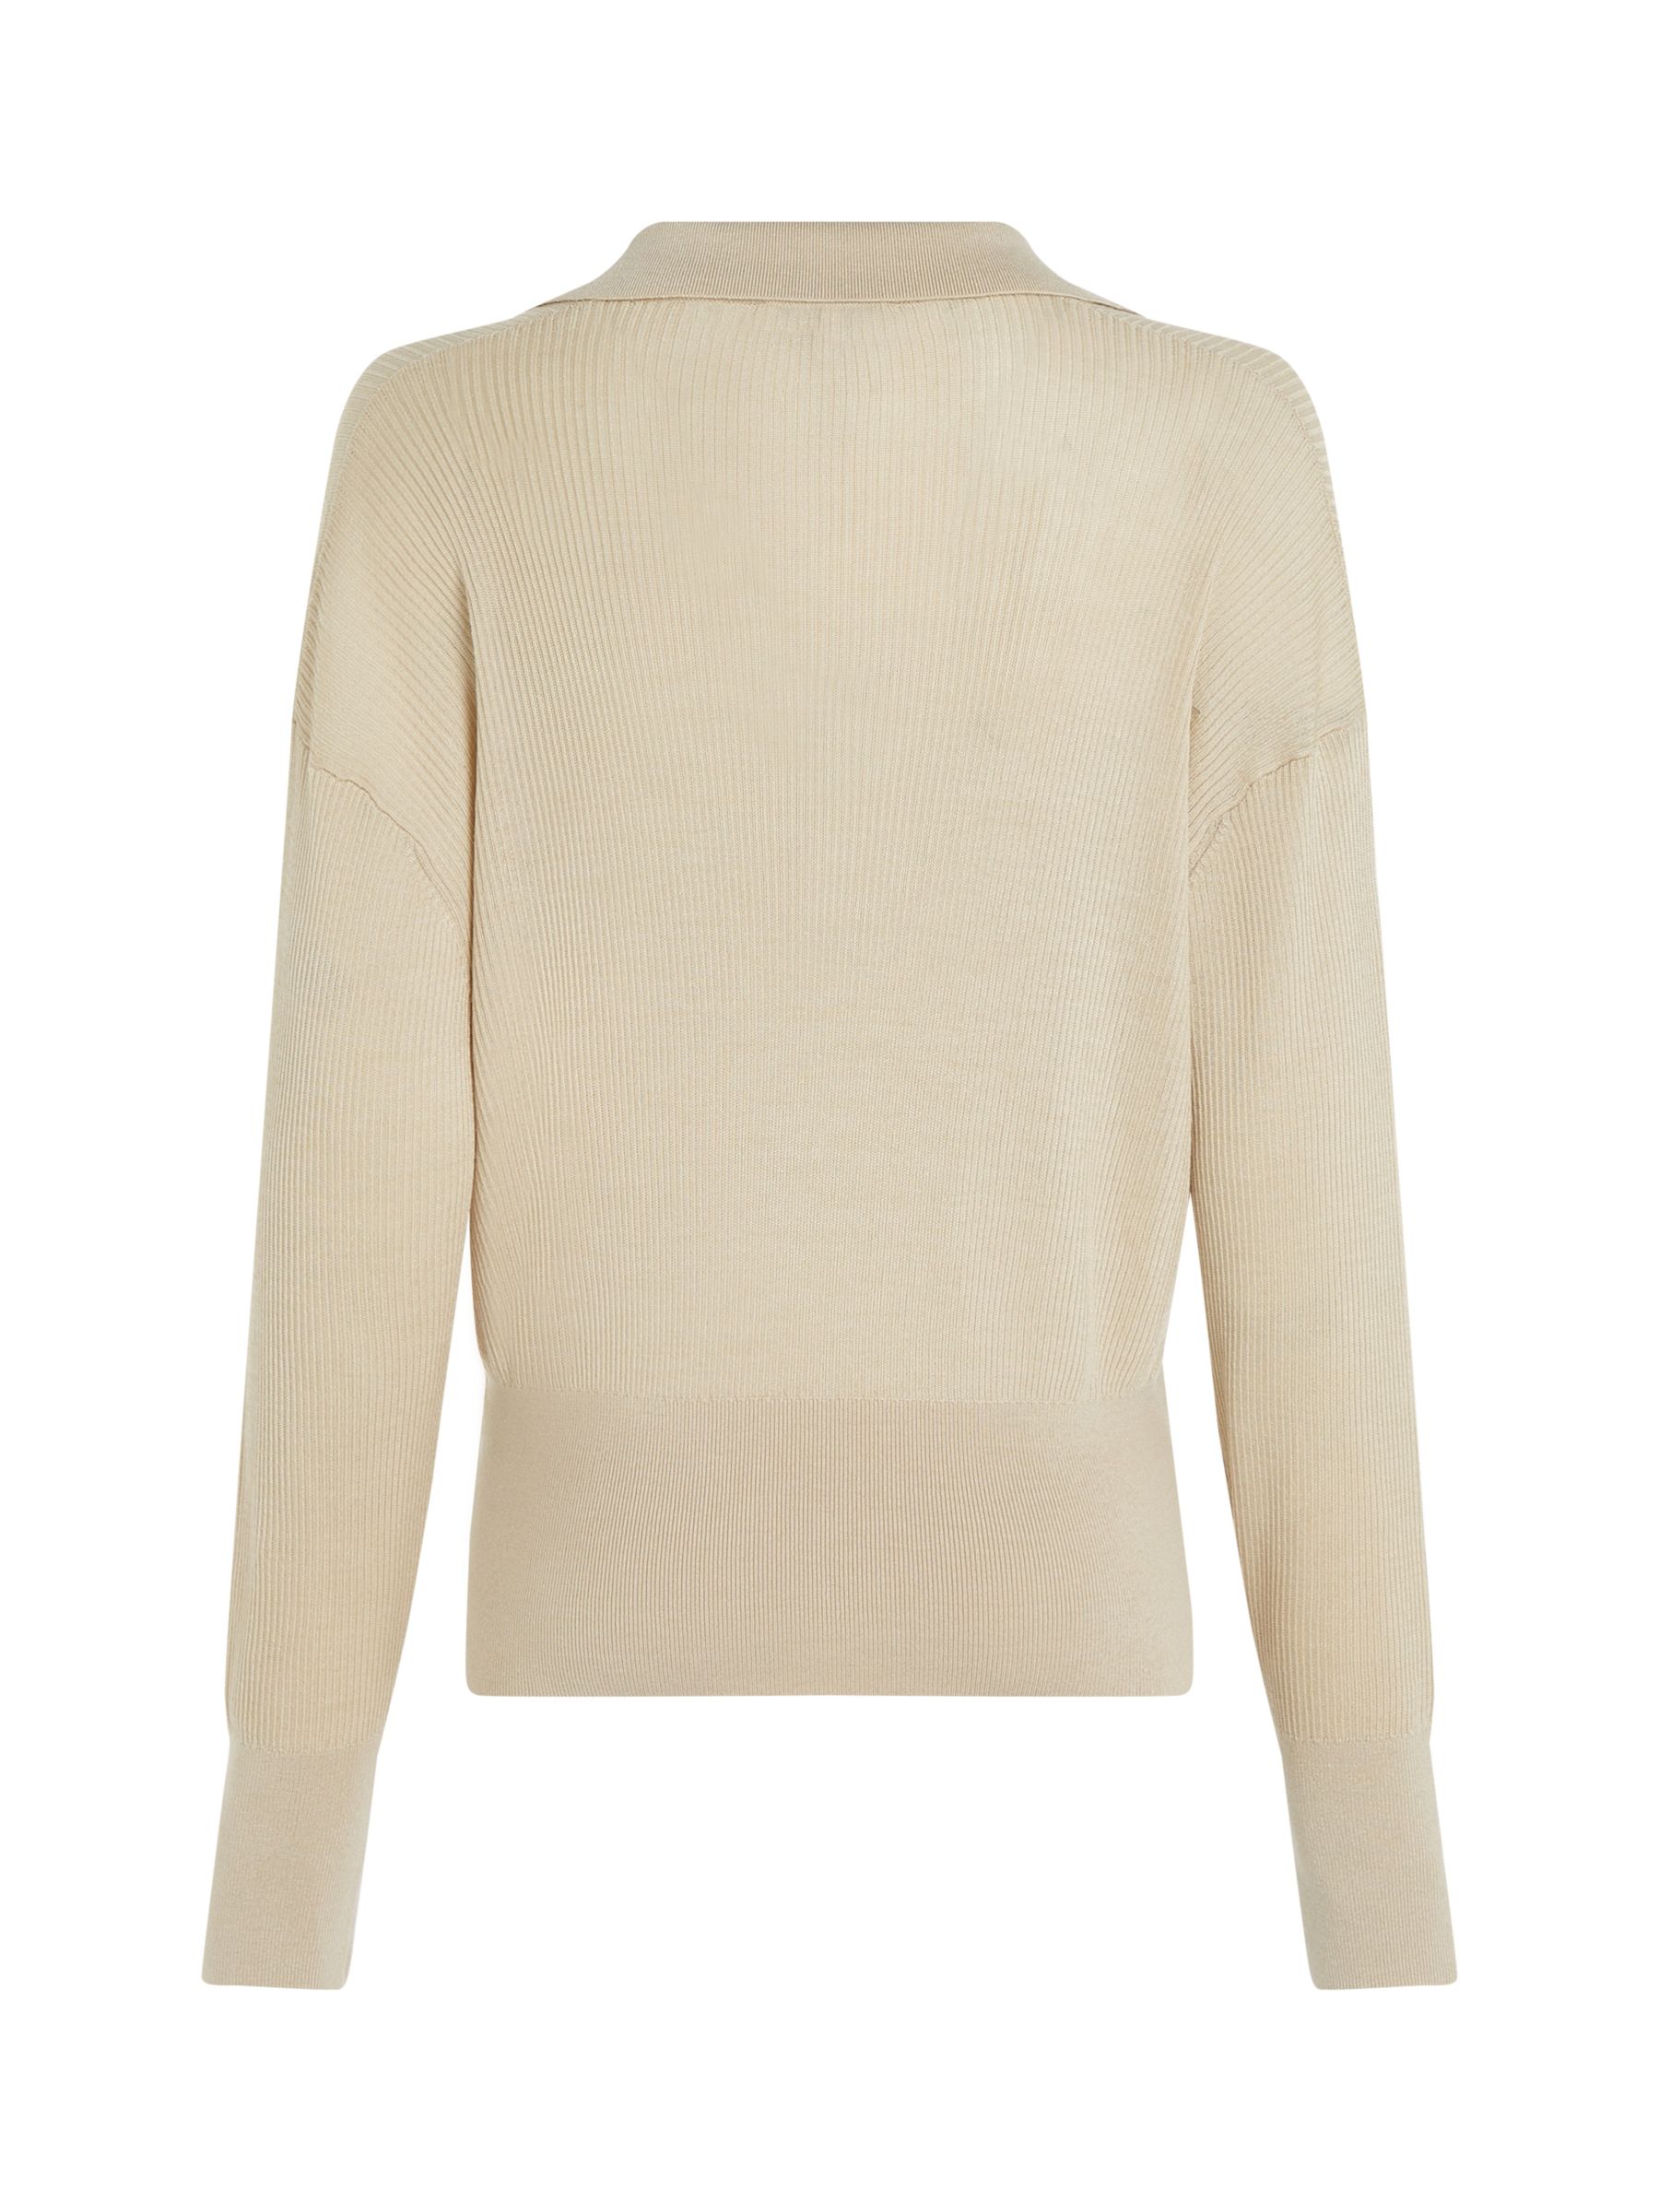 Tommy Hilfiger Open Polo Blousson Silk Blend Jumper, Classic Beige at ...